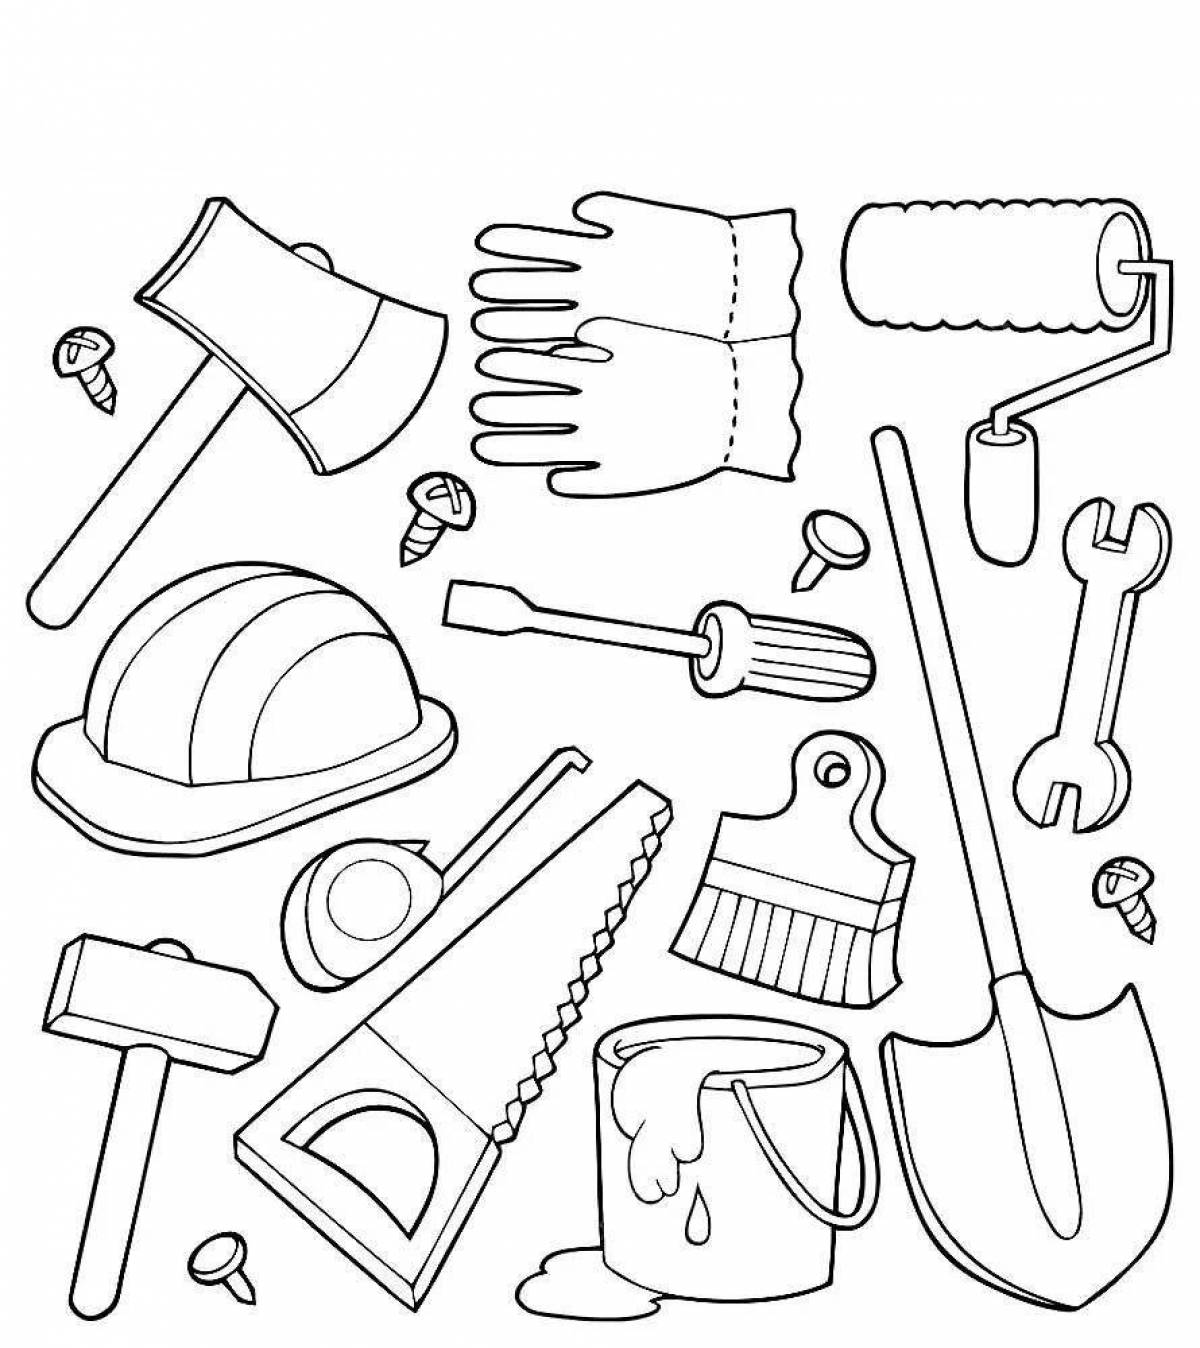 Tools for kids #16